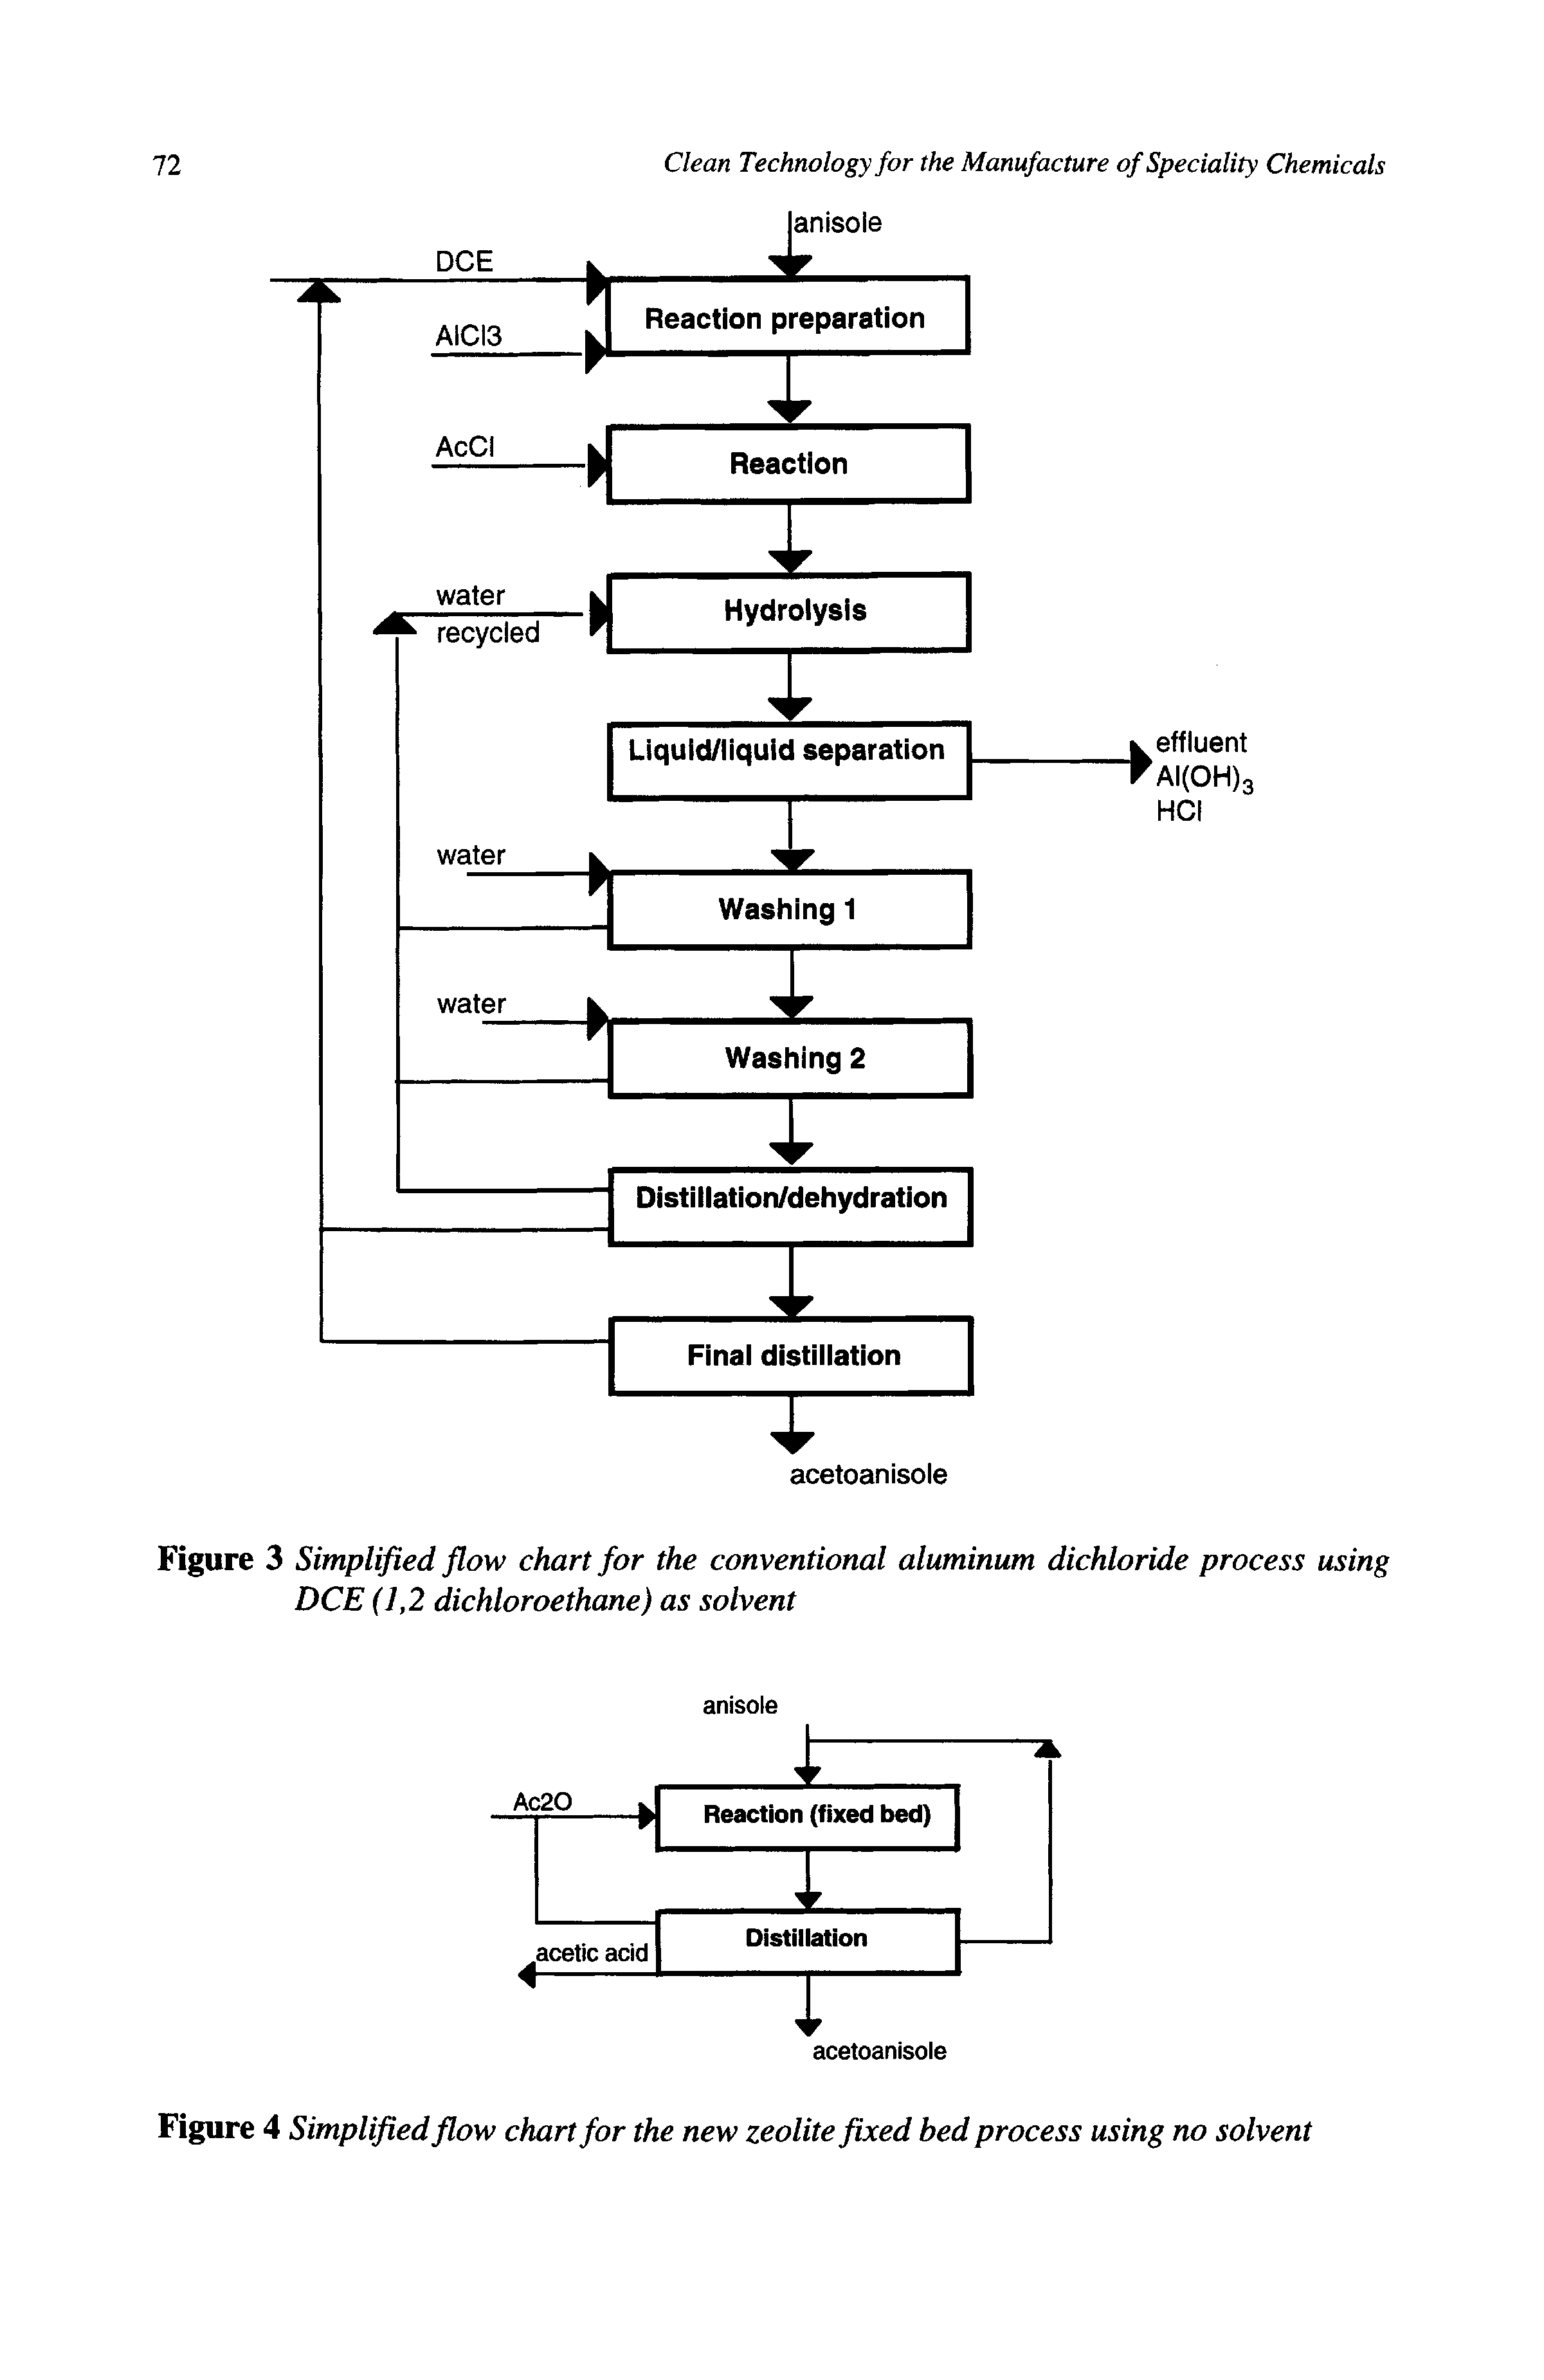 Figure 3 Simplified flow chart for the conventional aluminum dichloride process using DCE (1,2 dichloroethane) as solvent...